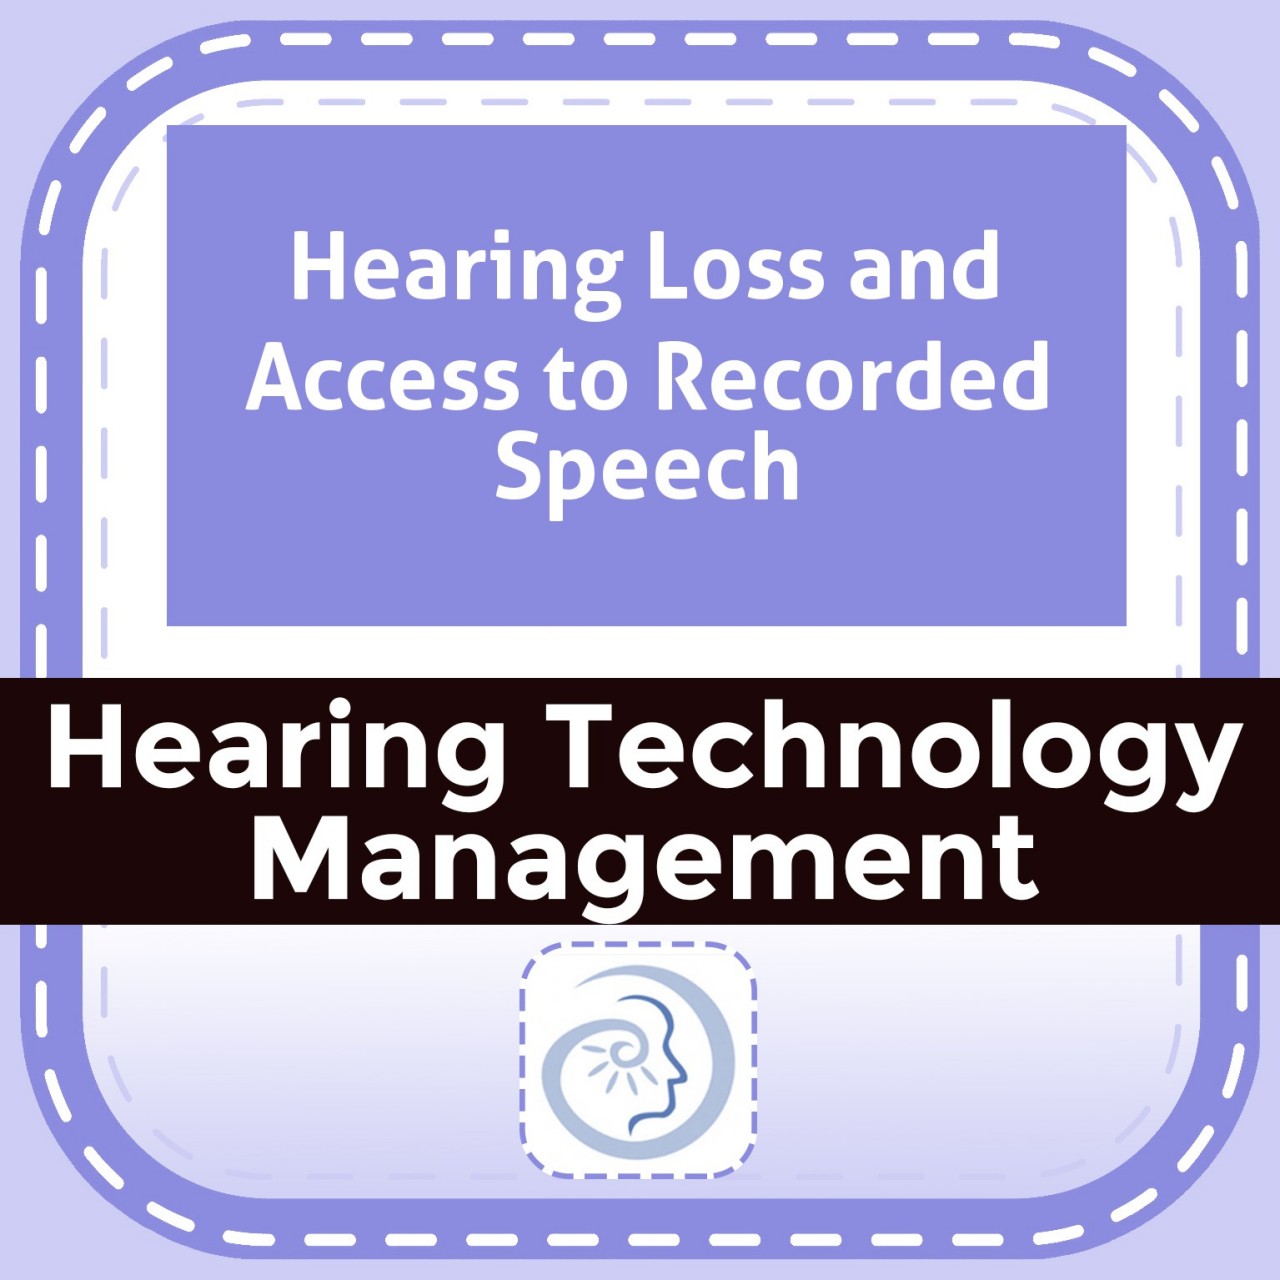 Hearing Loss and Access to Recorded Speech